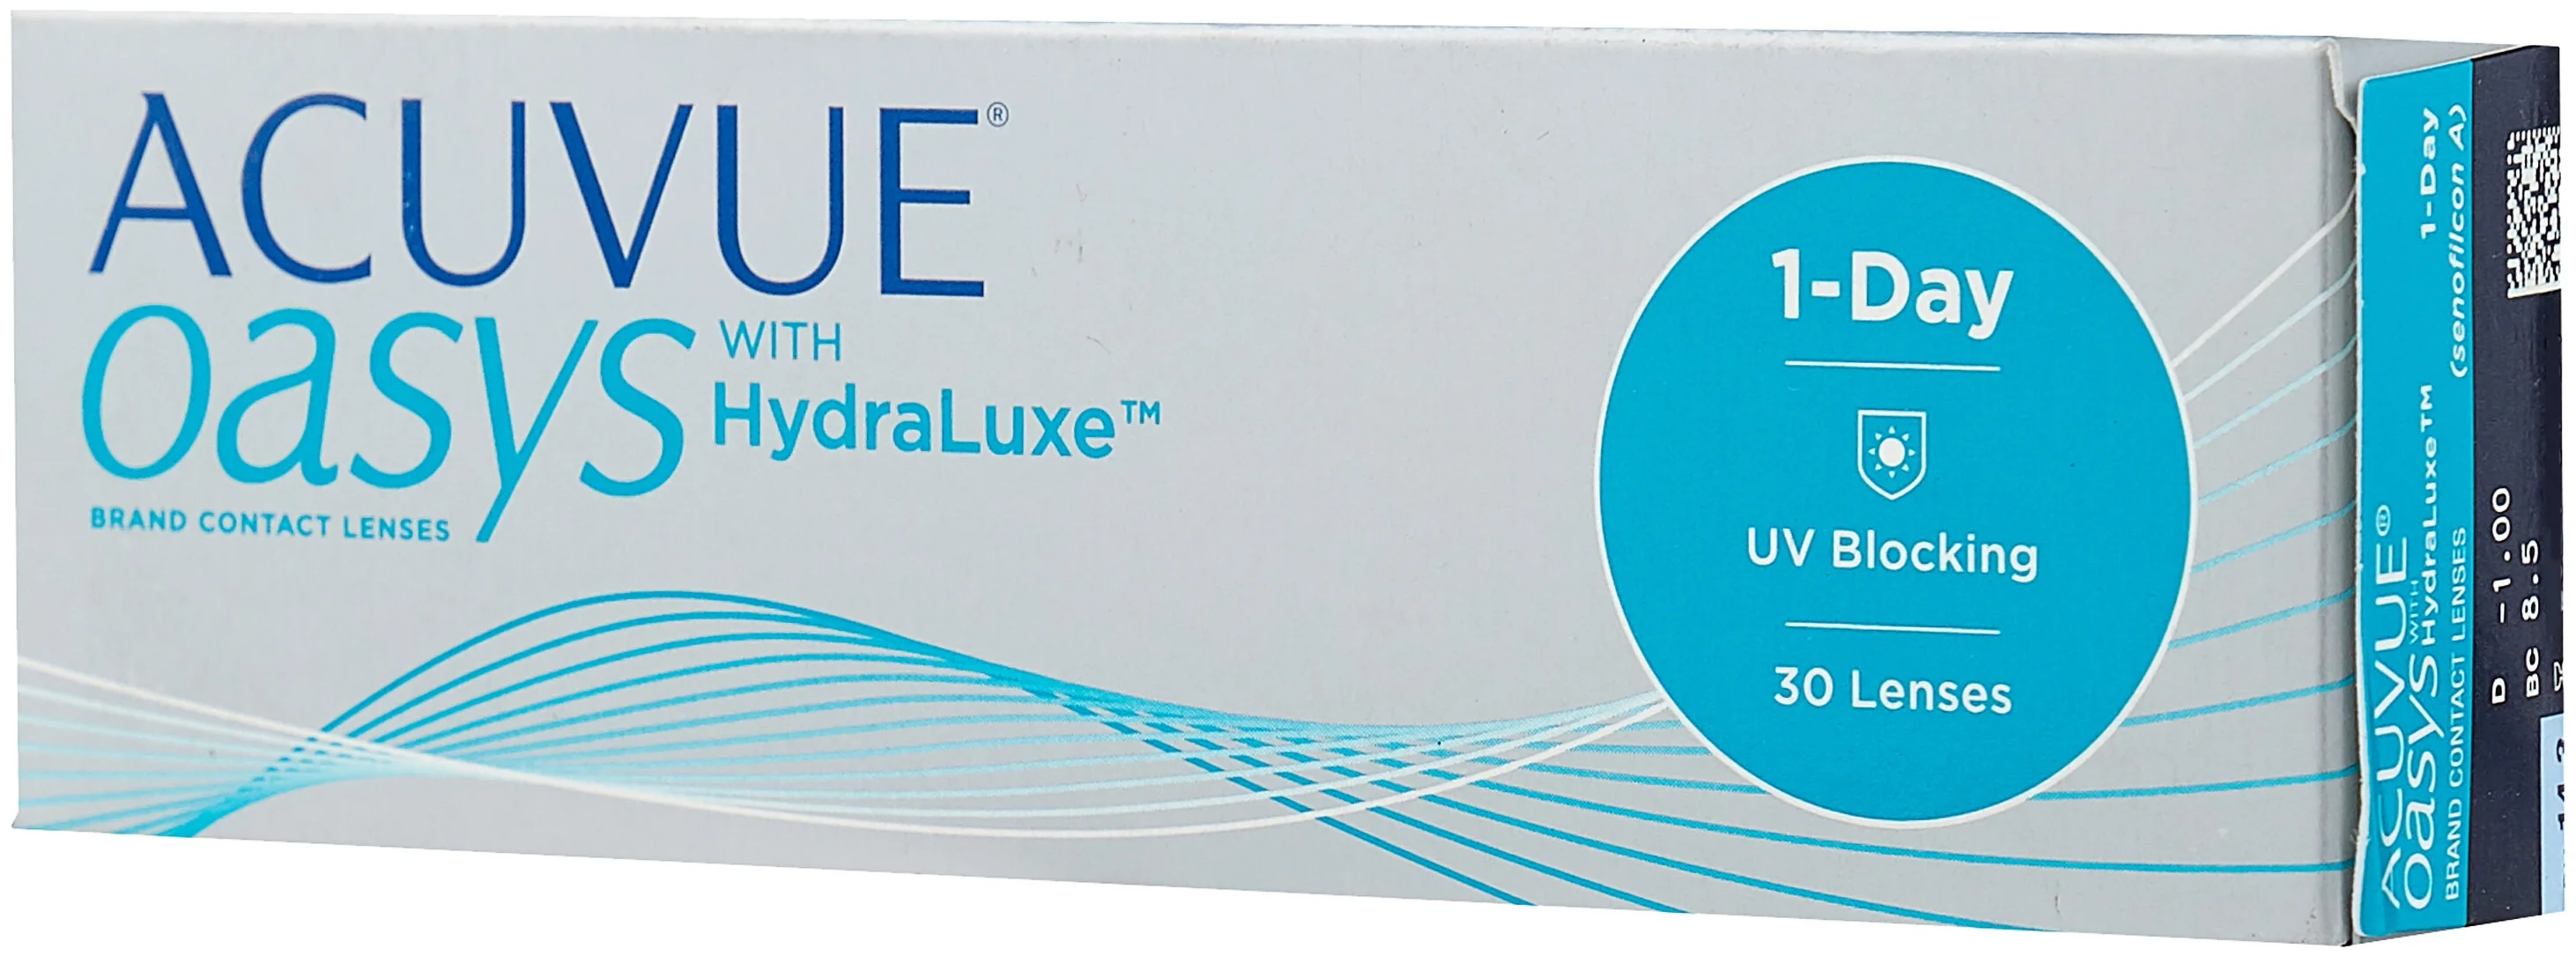 Acuvue OASYS 1-Day with HydraLuxe, 30 шт. - кислородопроницаемость: 103 Dk/t